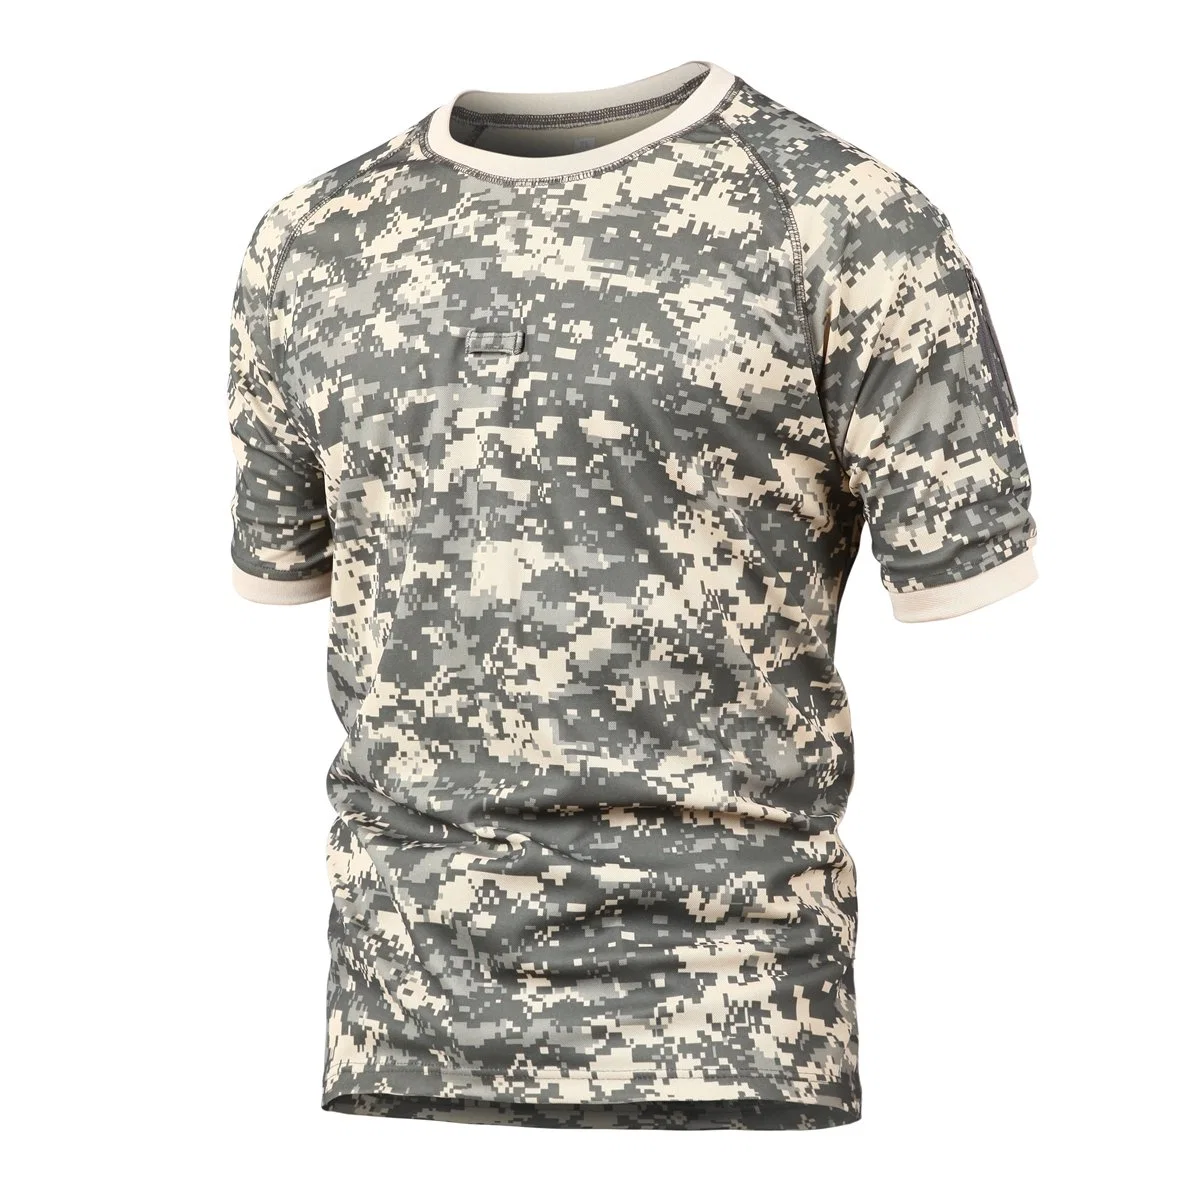 Men&prime; S Military Style Tactical Combat Short Sleeve T Shirt Camouflage Dry Fit Tee Shirt